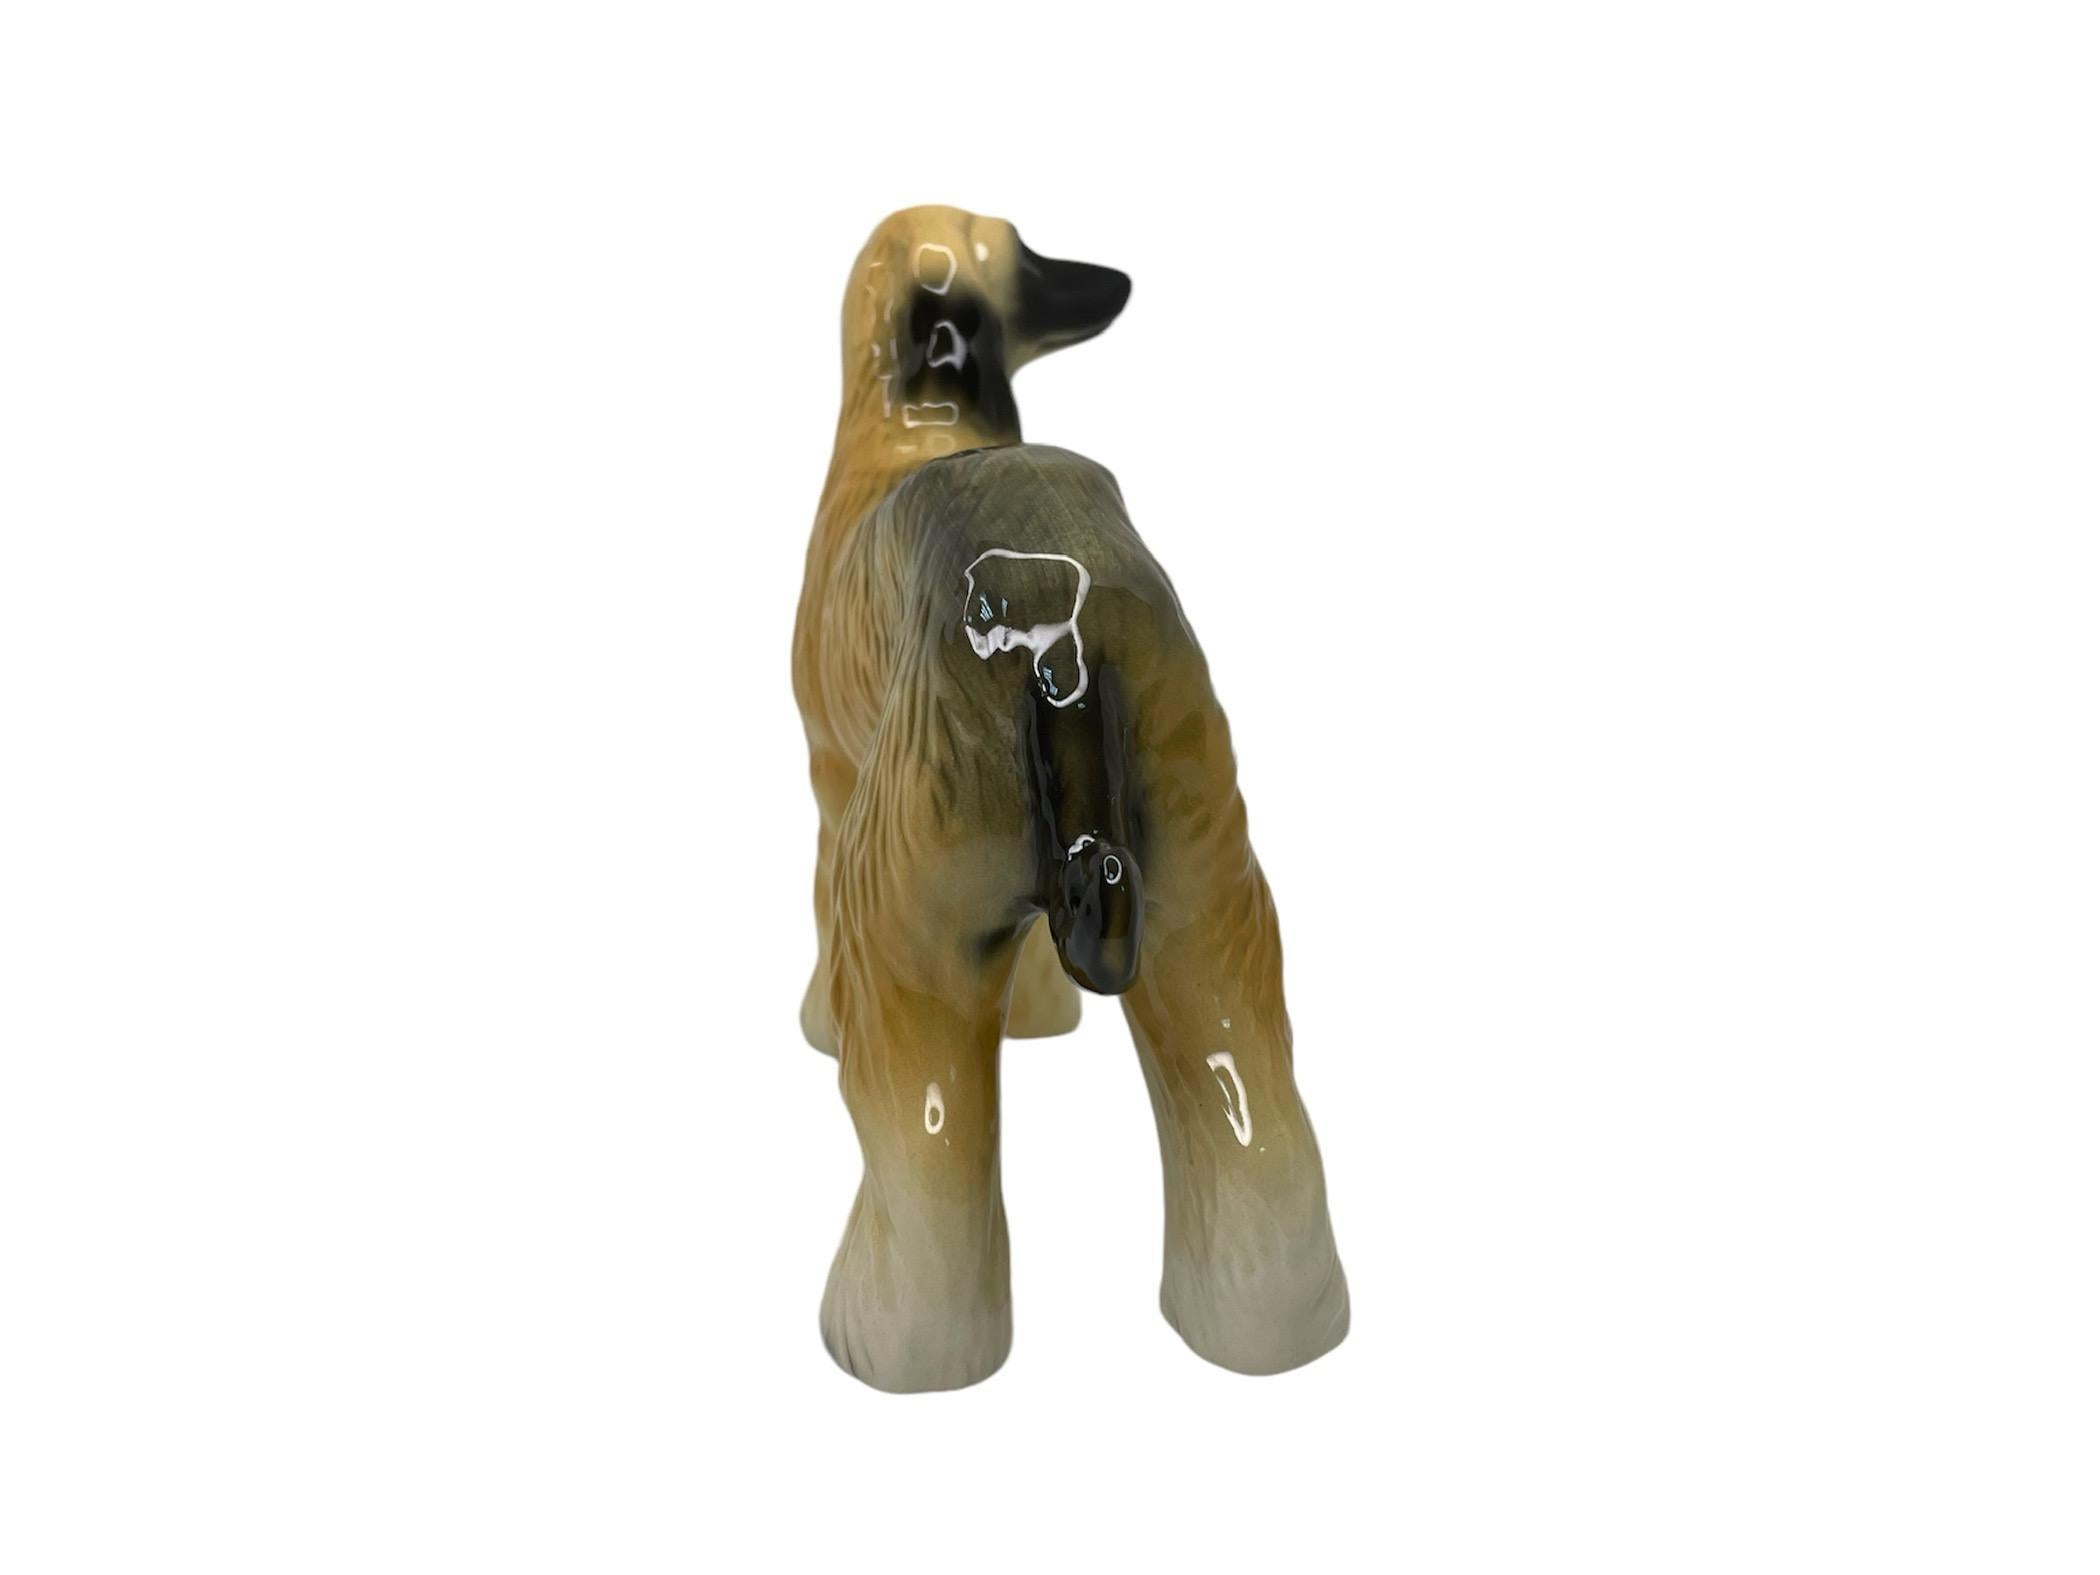 Ceramic Figurine Of An Afghan Hound Dog In Good Condition For Sale In Guaynabo, PR